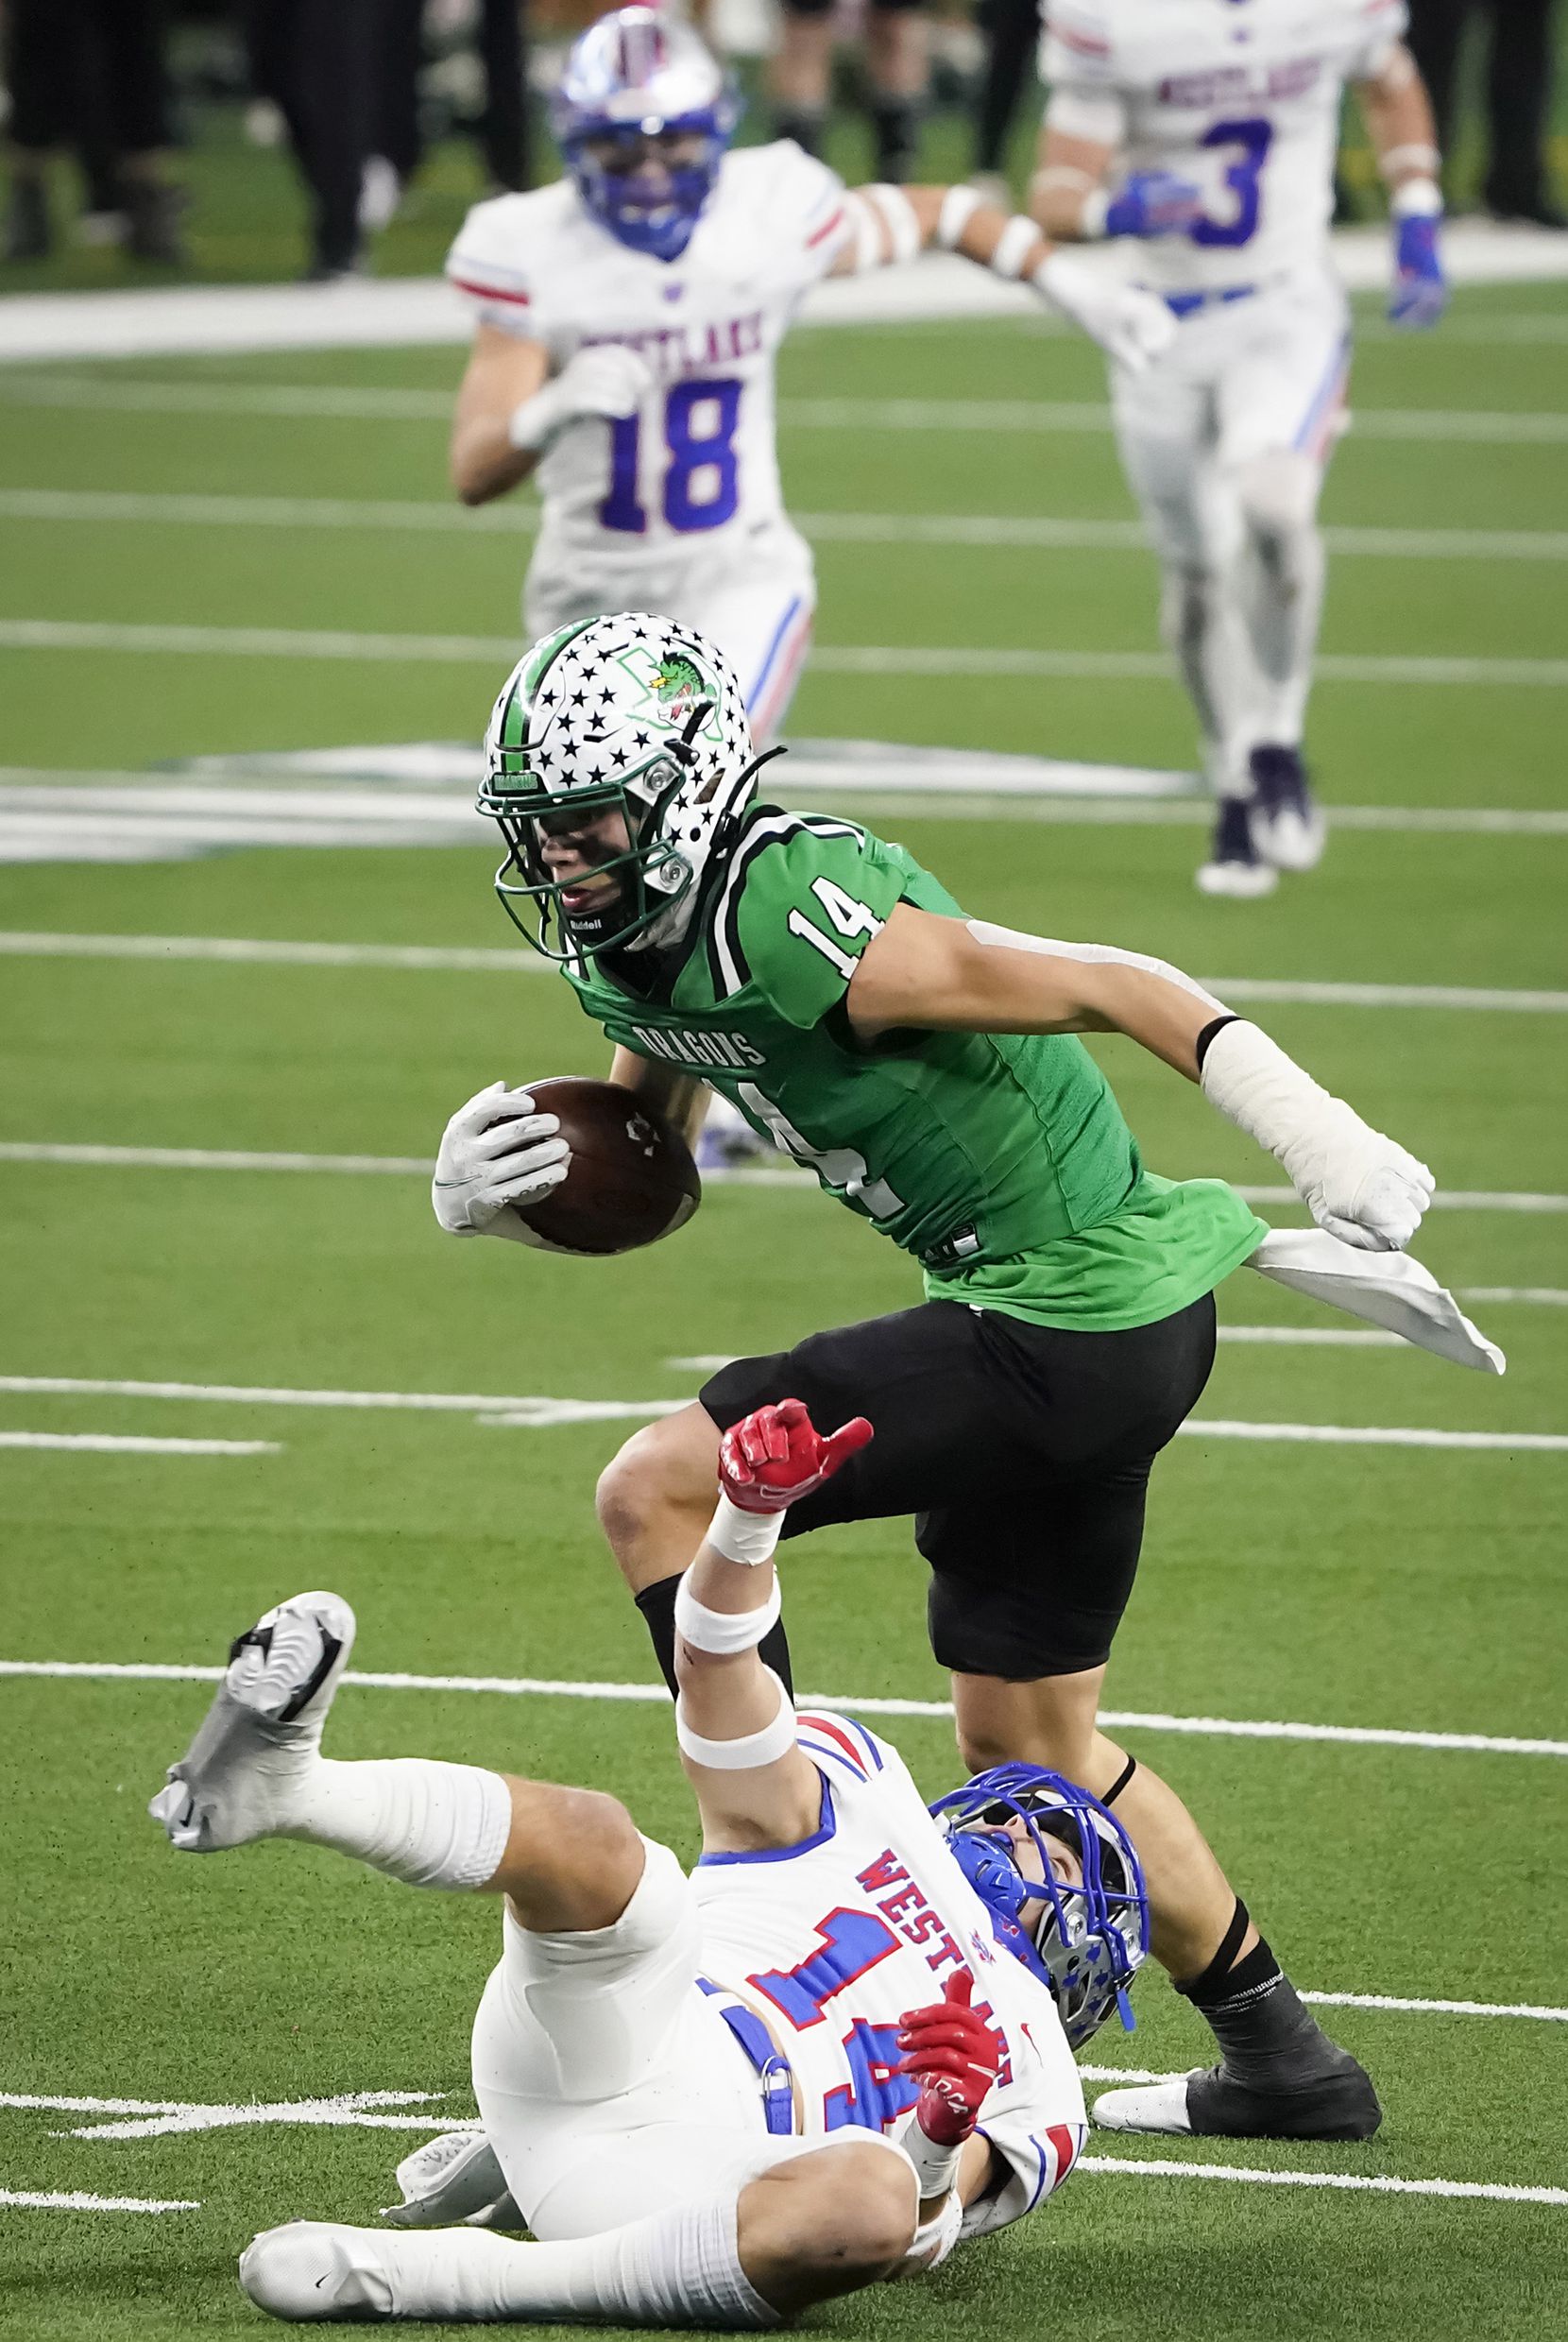 Southlake Carroll wide receiver Brady Boyd (14) break the tackles of Austin Westlake defensive back Michael Taaffe (14) on a 49-yard touchdown play during the first quarter of the Class 6A Division I state football championship game at AT&T Stadium on Saturday, Jan. 16, 2021, in Arlington, Texas.